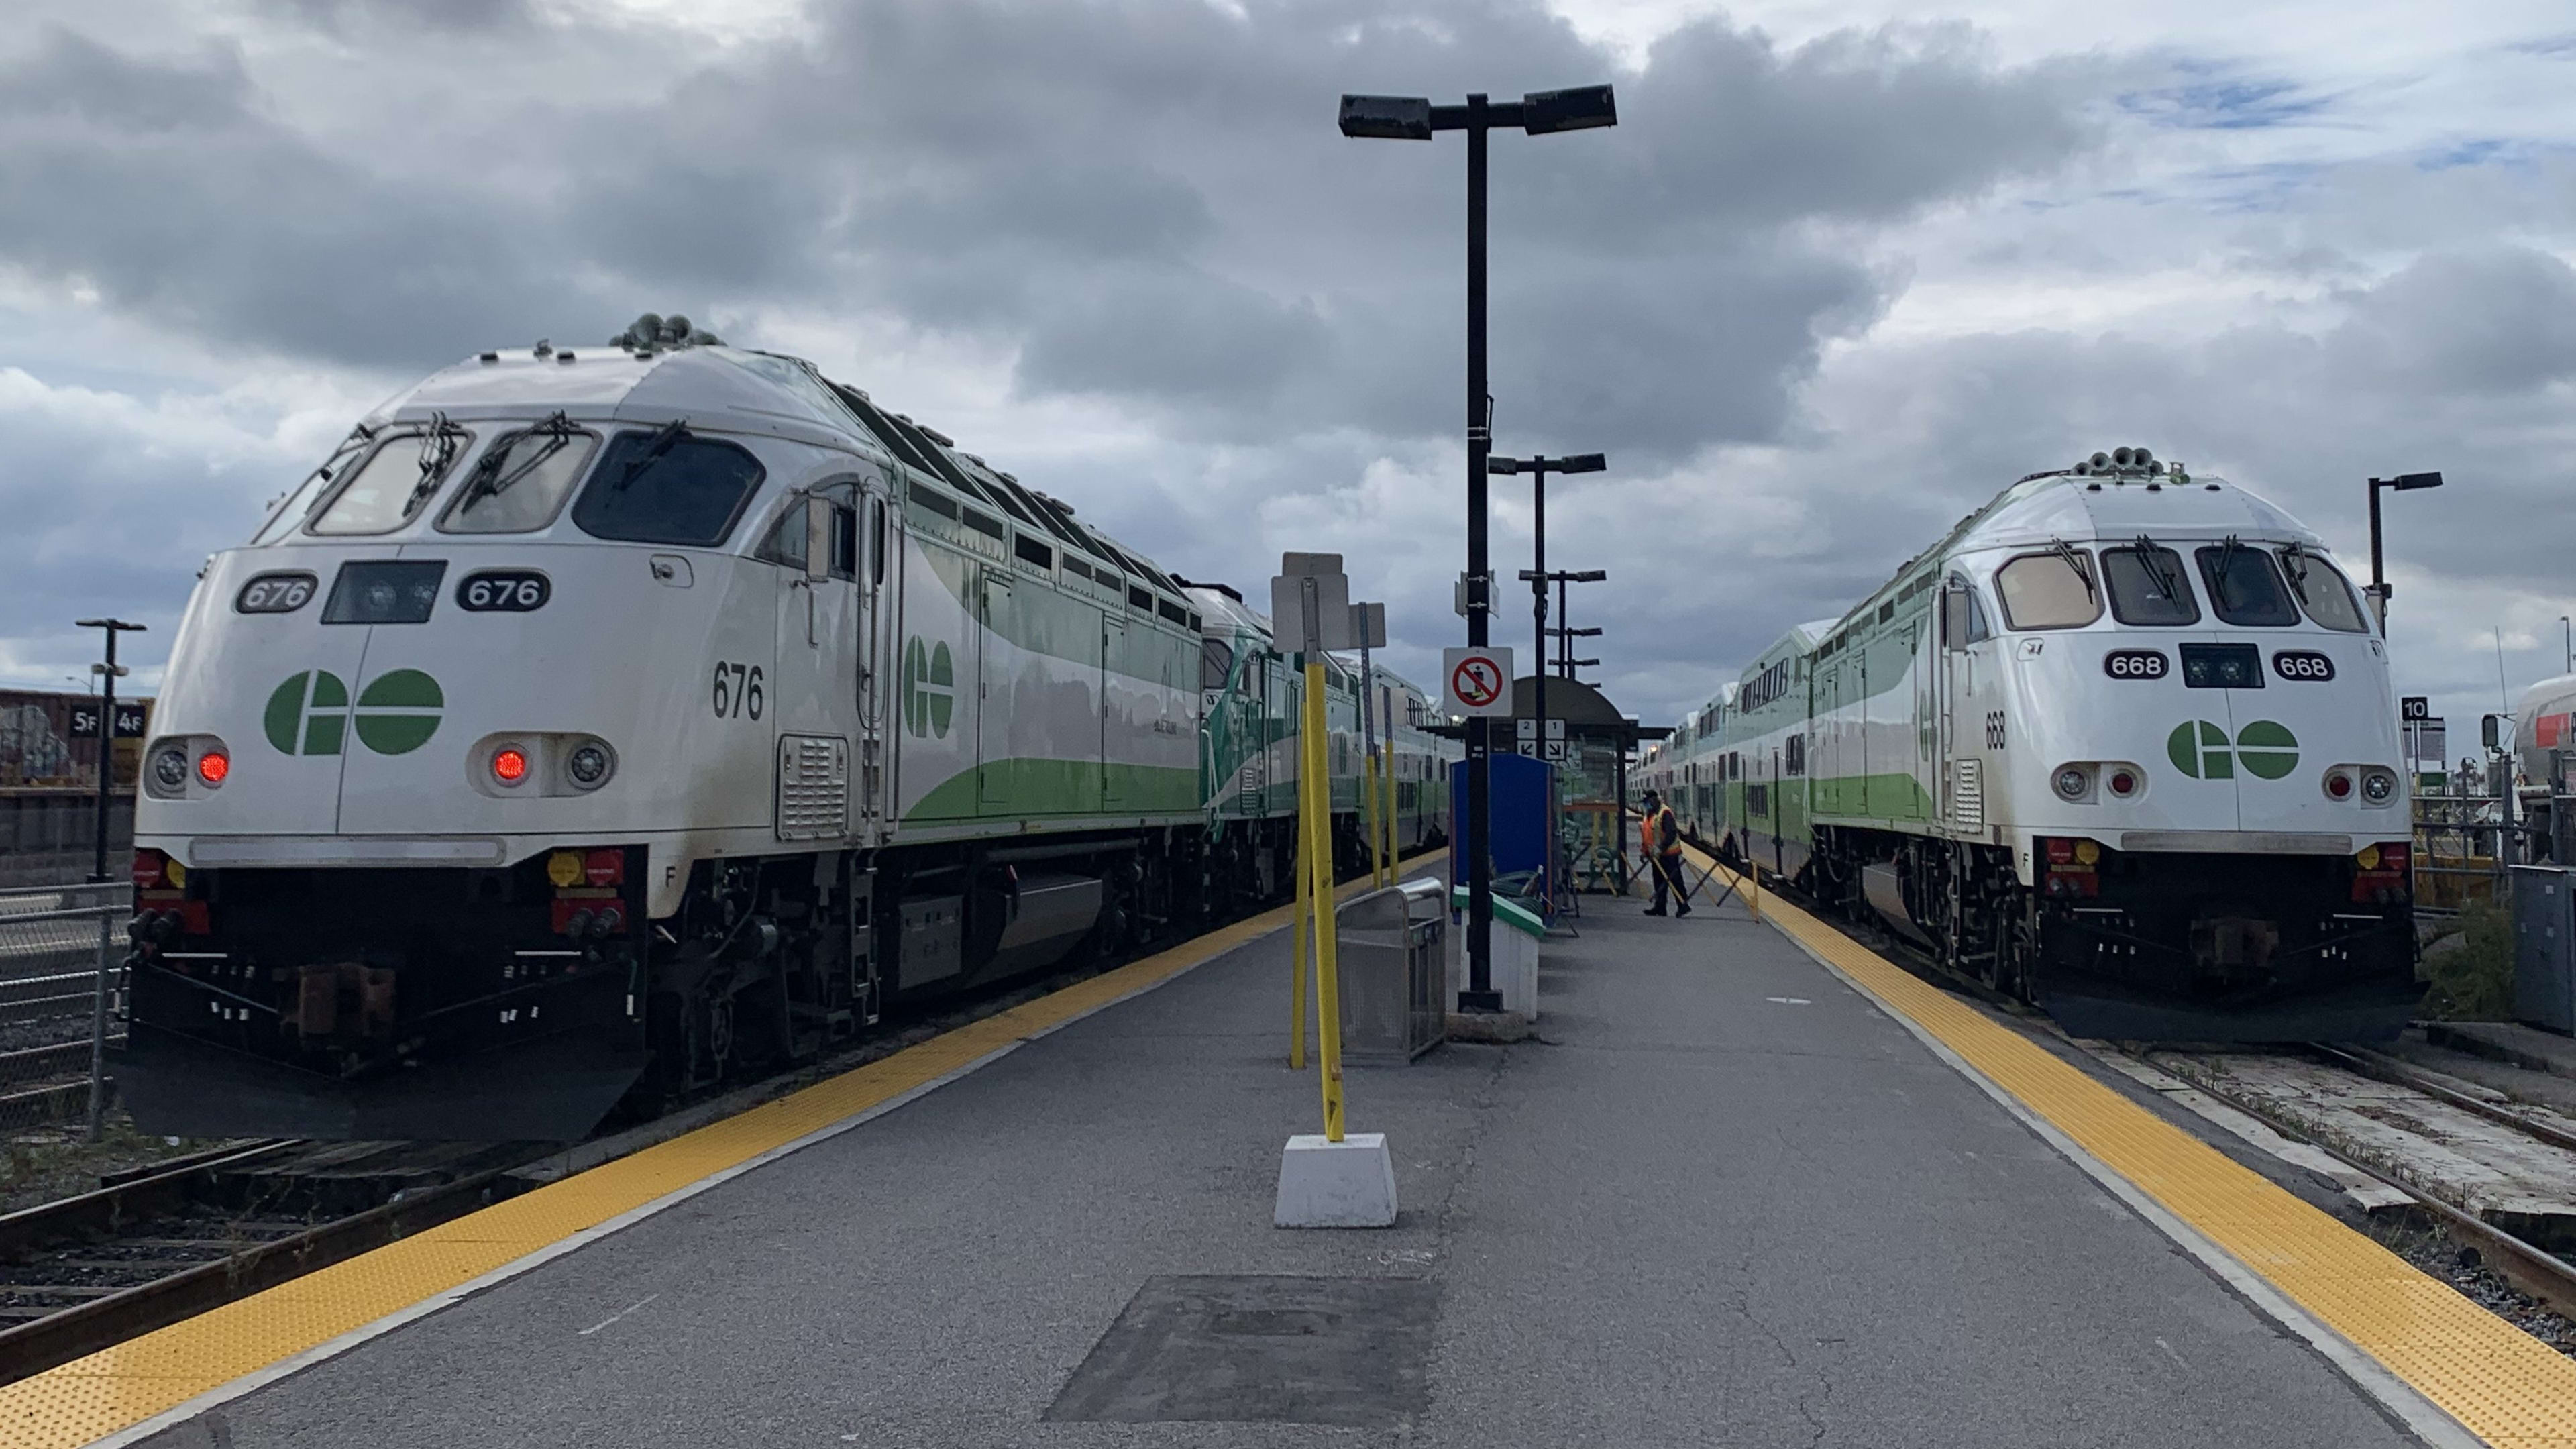 GO trains sit ready to depart at Oshawa GO station.